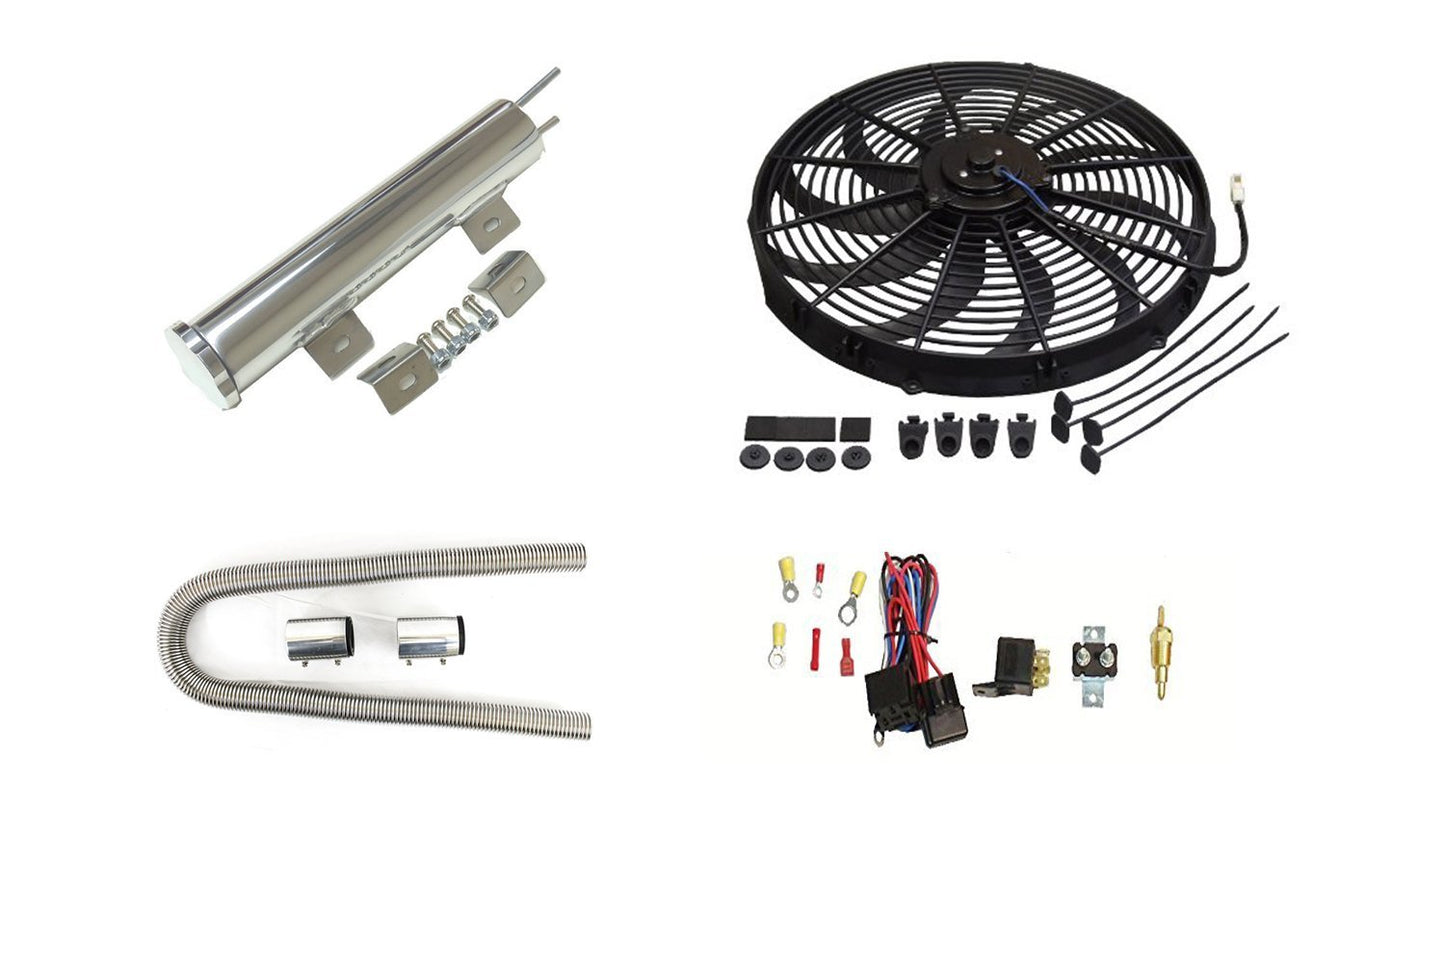 Electric S Blade 16" Radiator Cooling Fan with Thermostat Relay Kit&3"X 10" Inch Radiator Overflow Tank&48" Radiator Hose